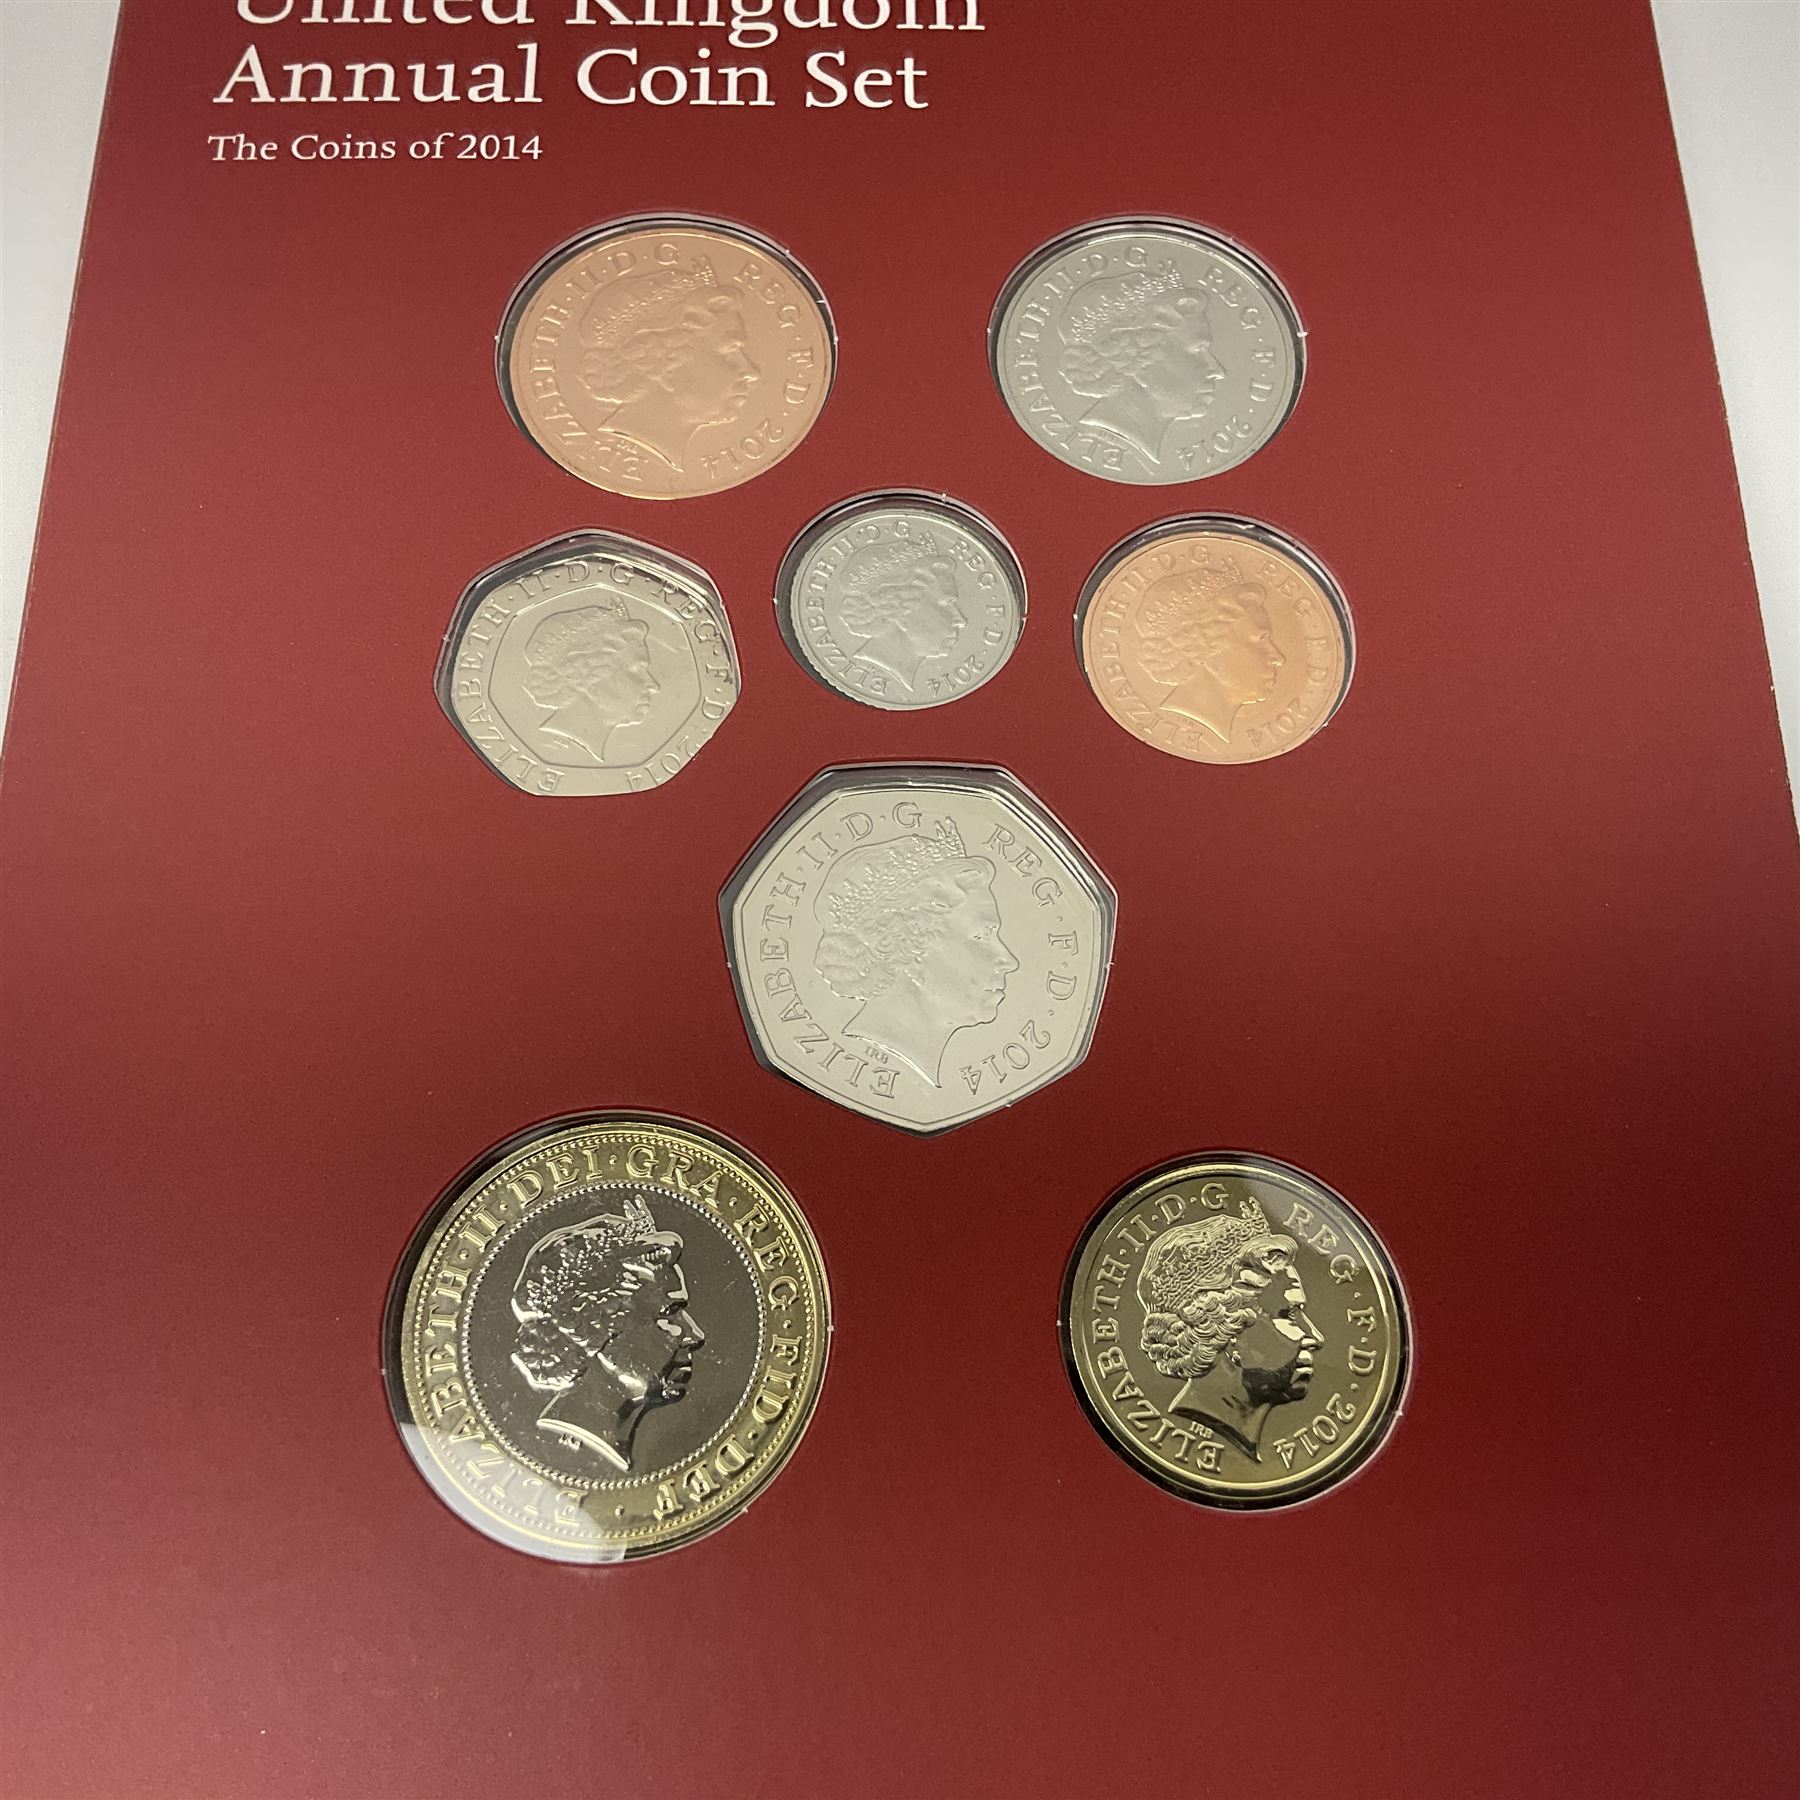 The Royal Mint United Kingdom 2014 annual coin set - Image 3 of 12